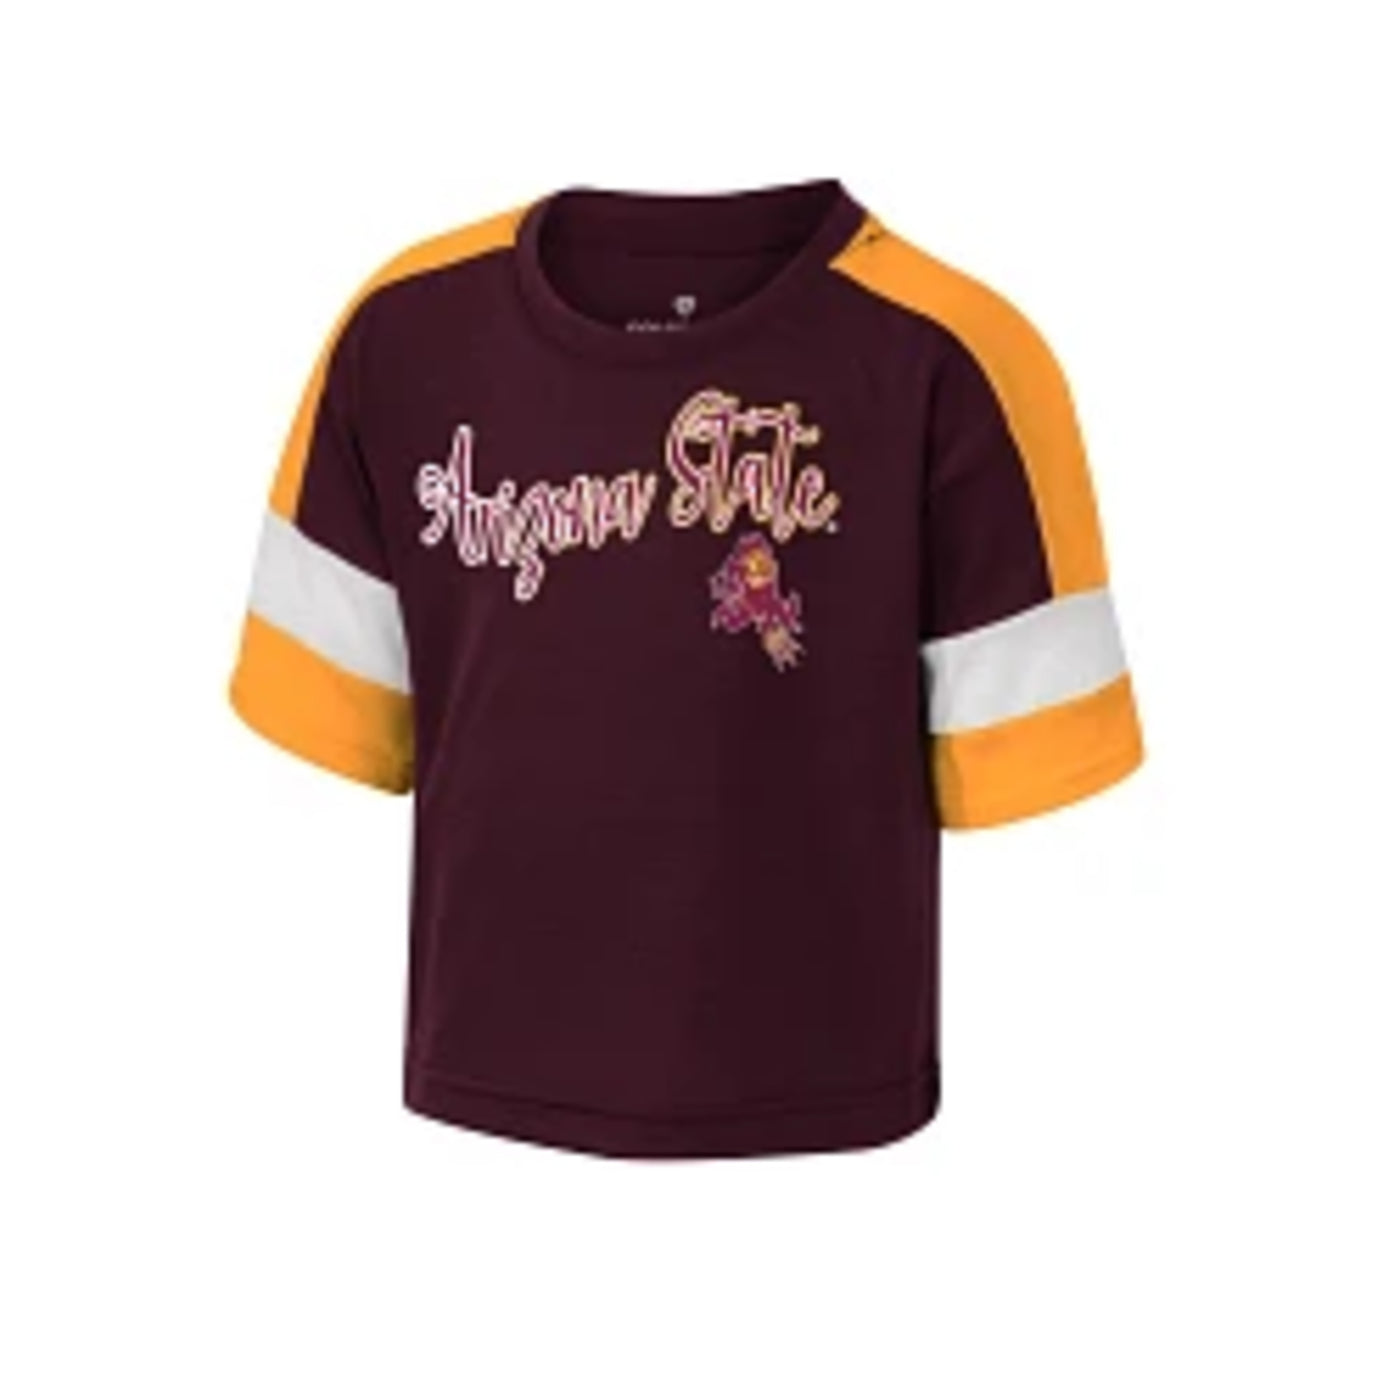 ASU maroon youth girls shirt with the cursive text 